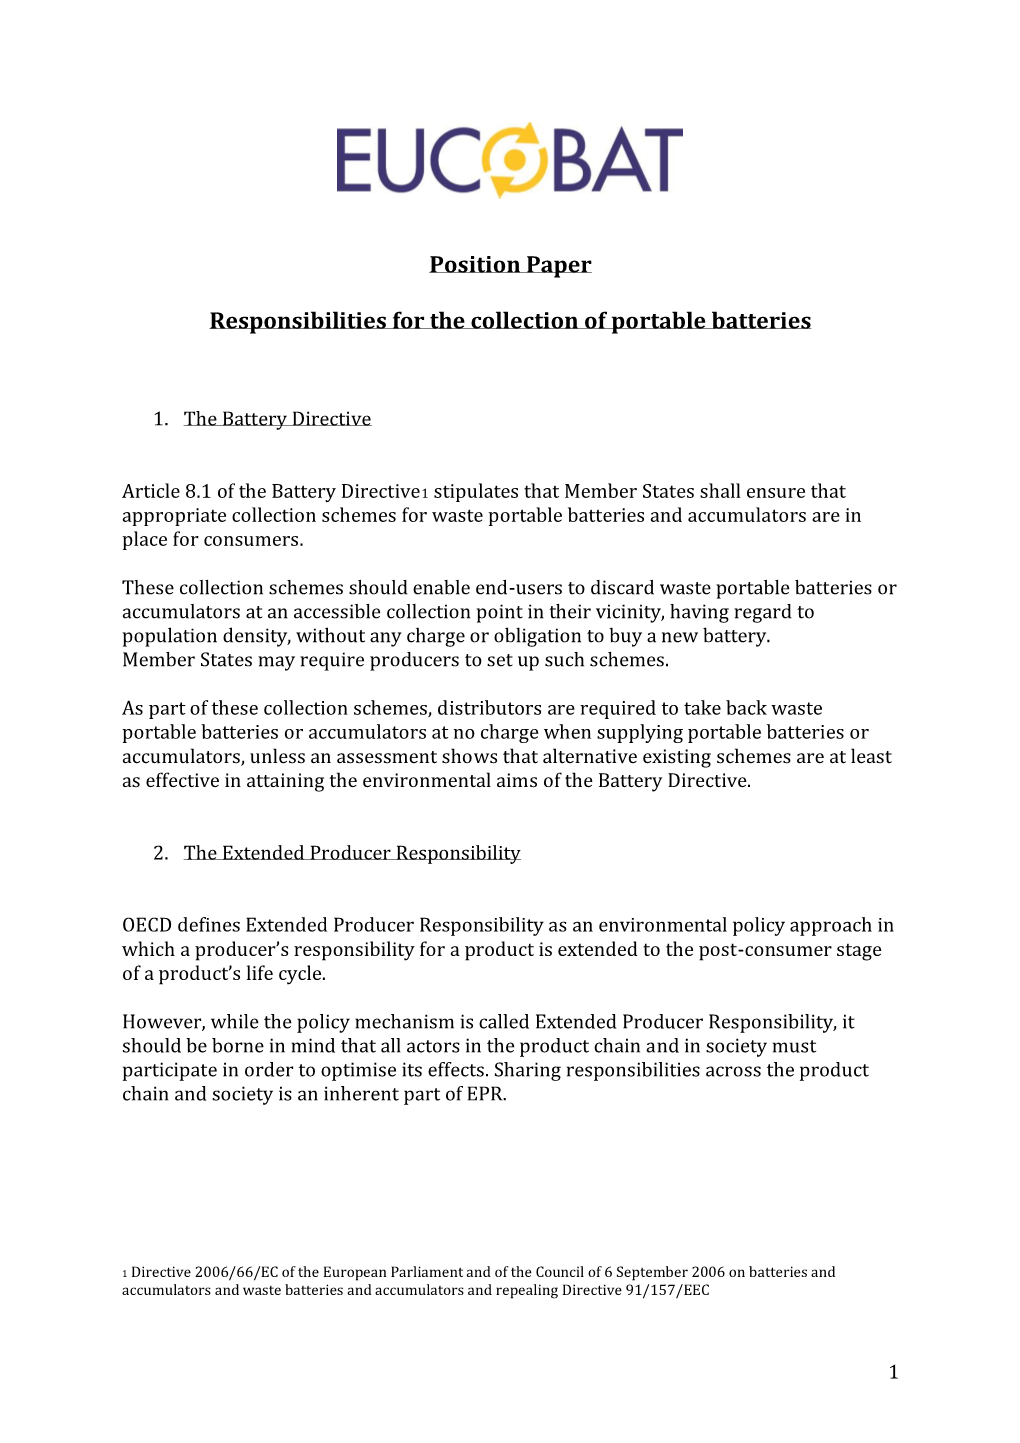 Position Paper Responsibilities for the Collection of Portable Batteries